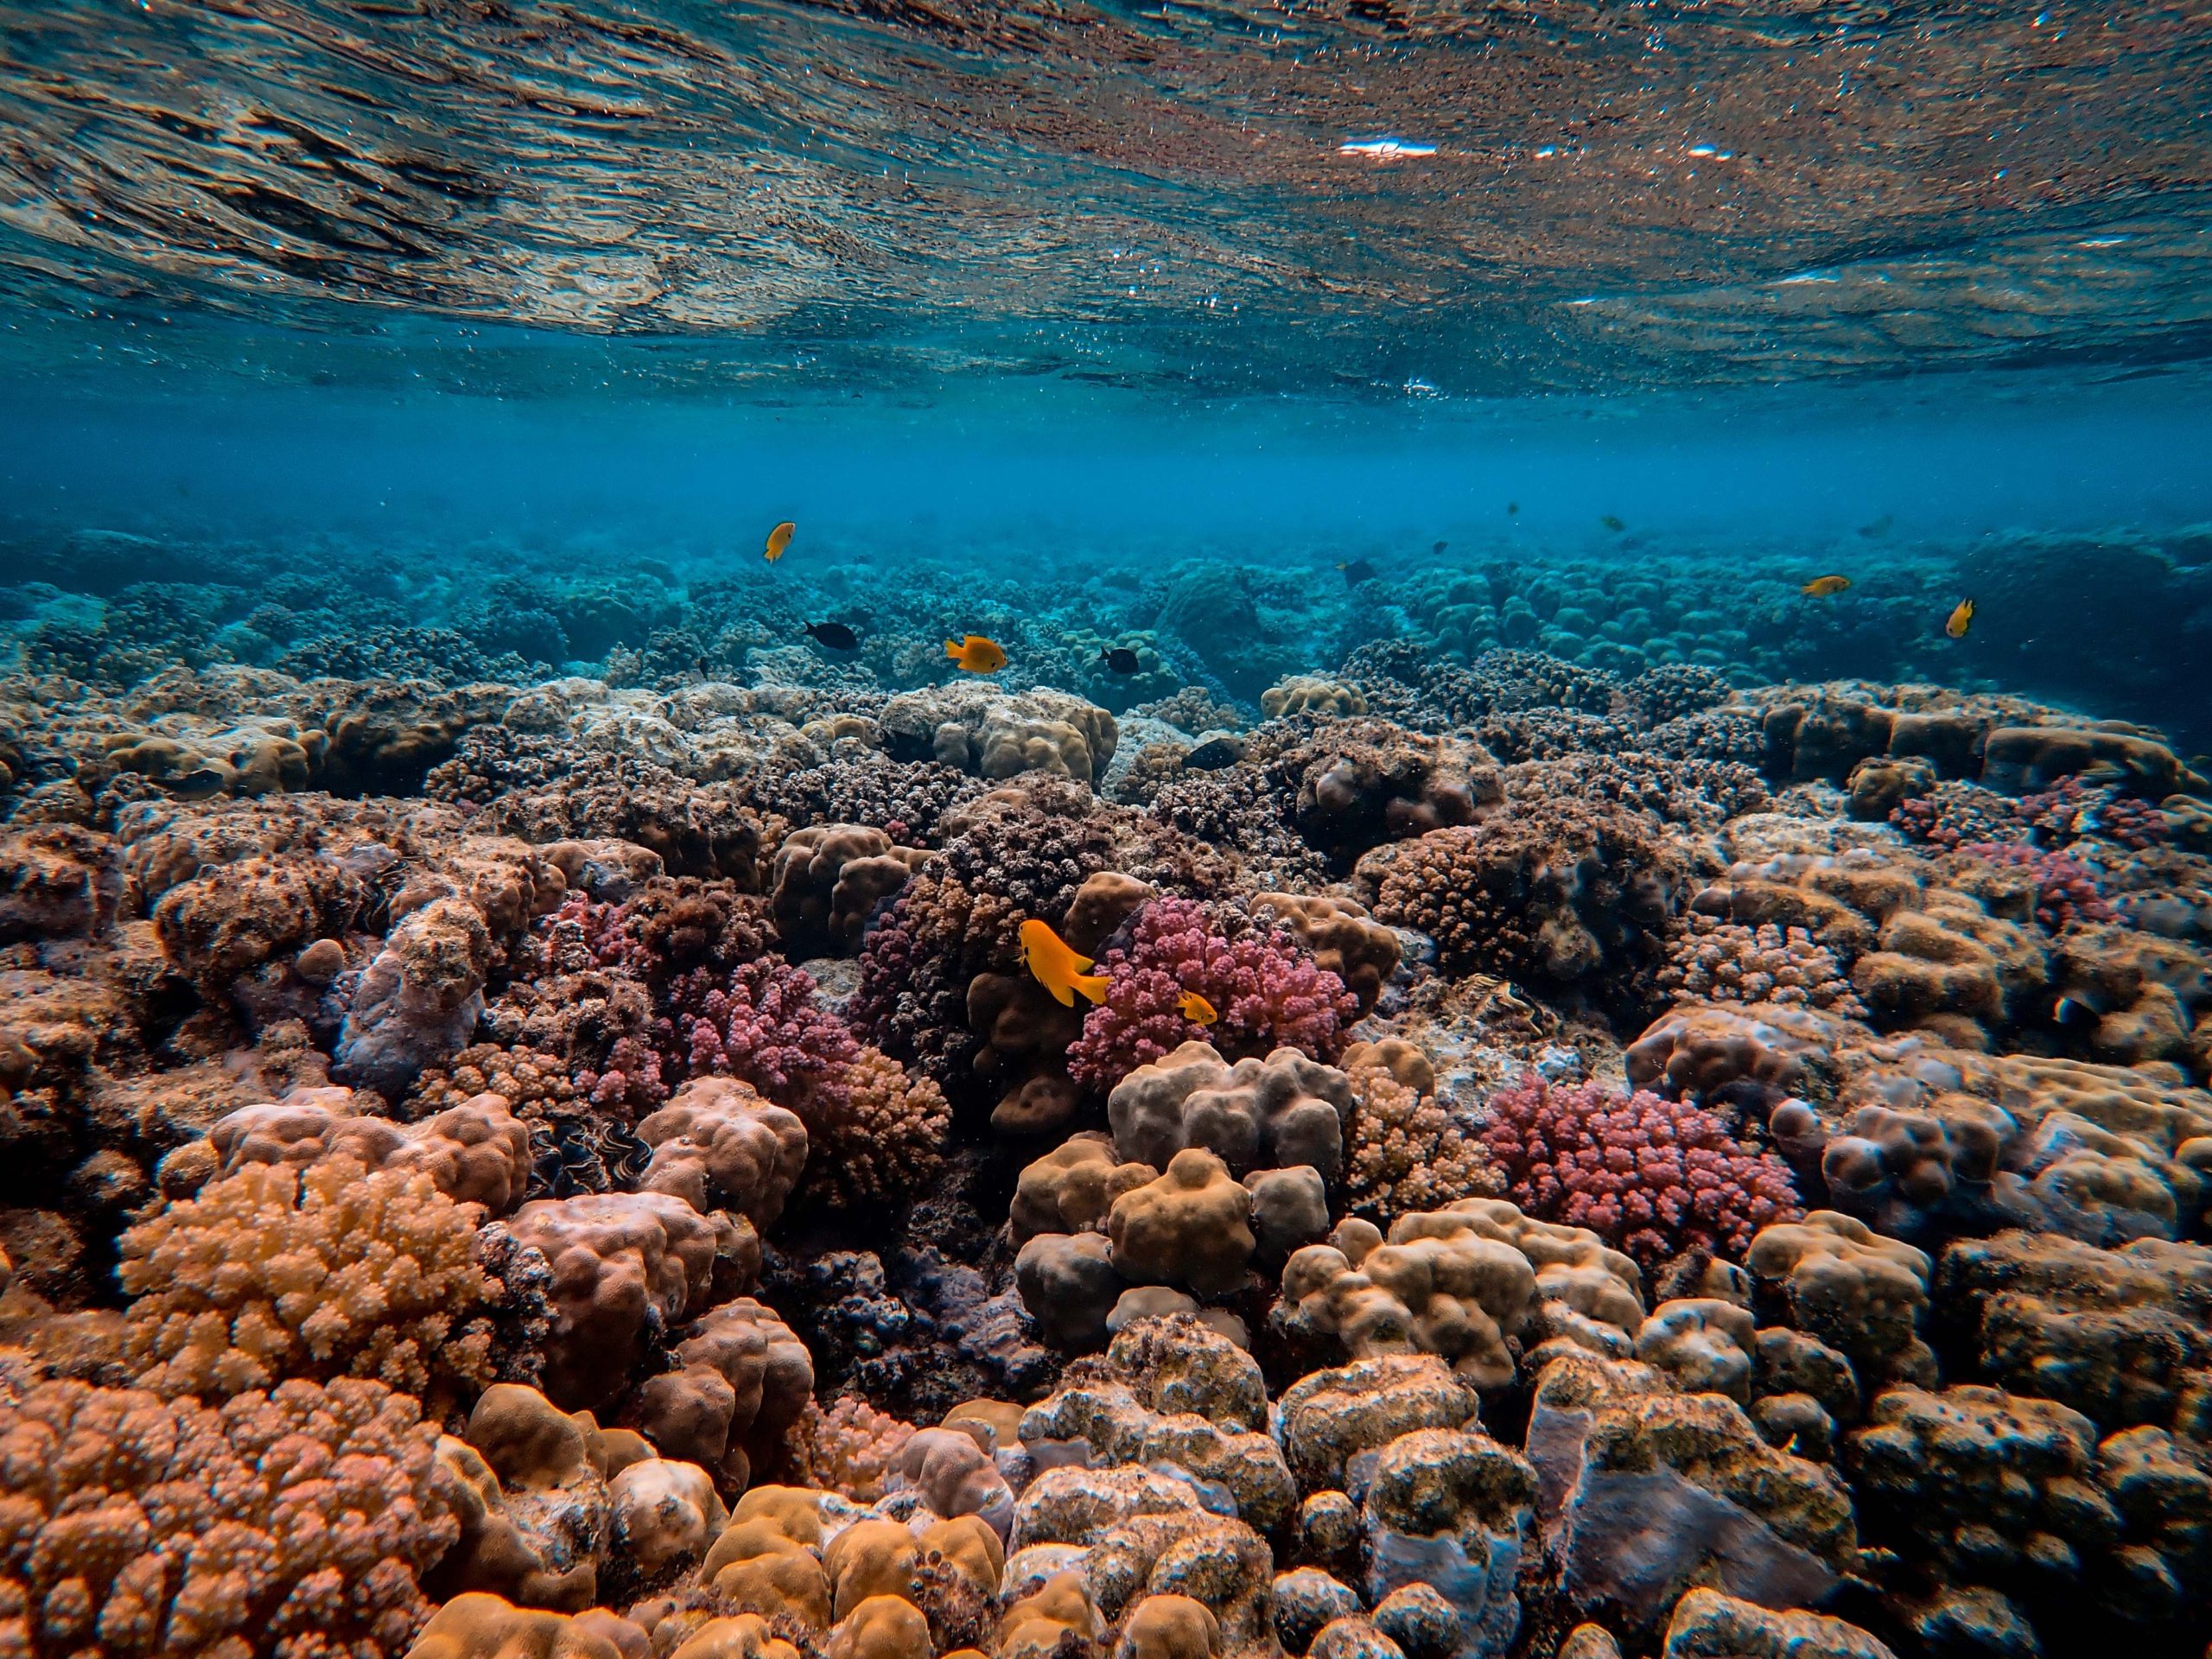 How One Company Is Restoring Coral To Combat Climate Change's